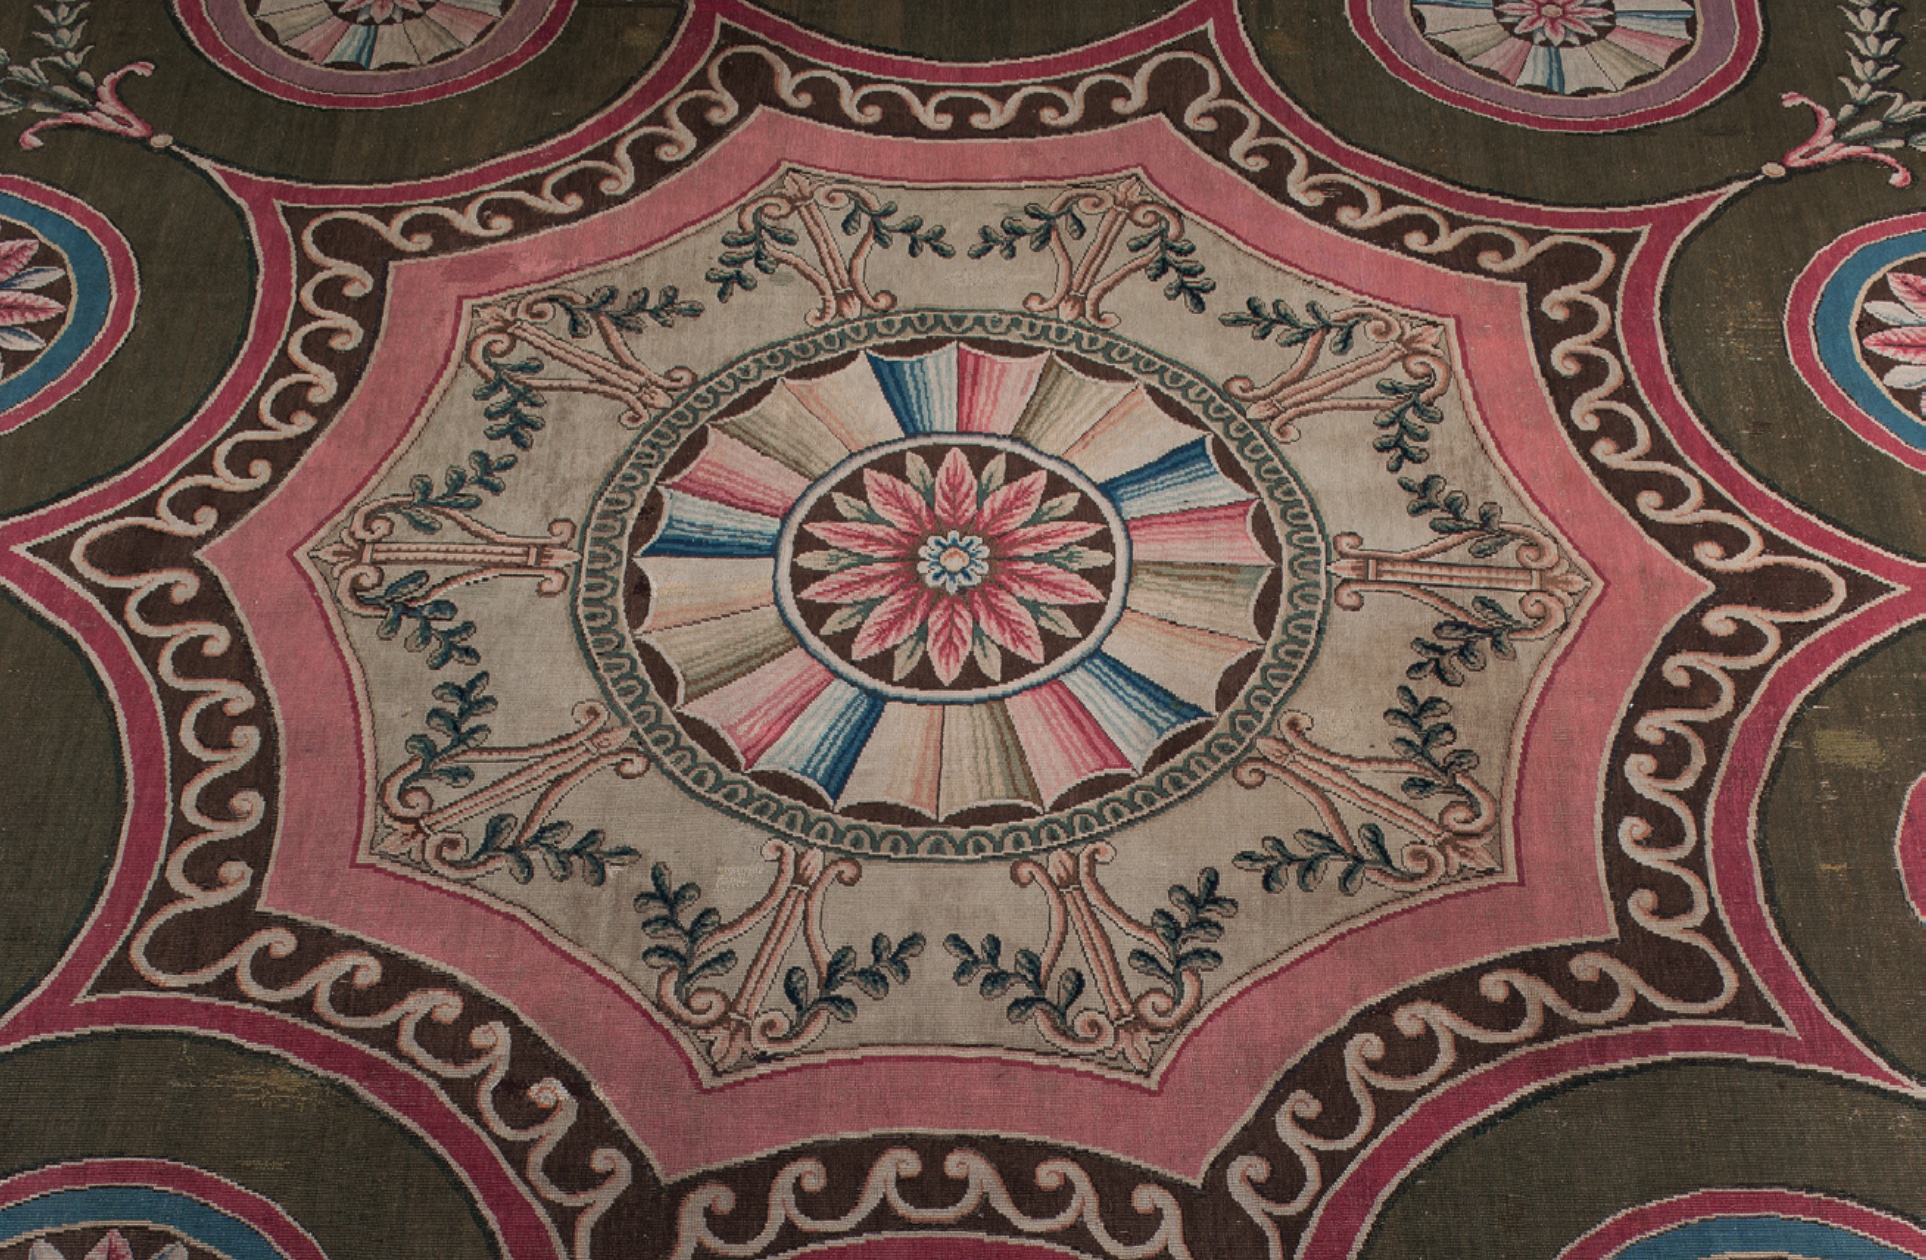 The original Axminster carpet, using bold pink and green, in the Music Room at Harewood House